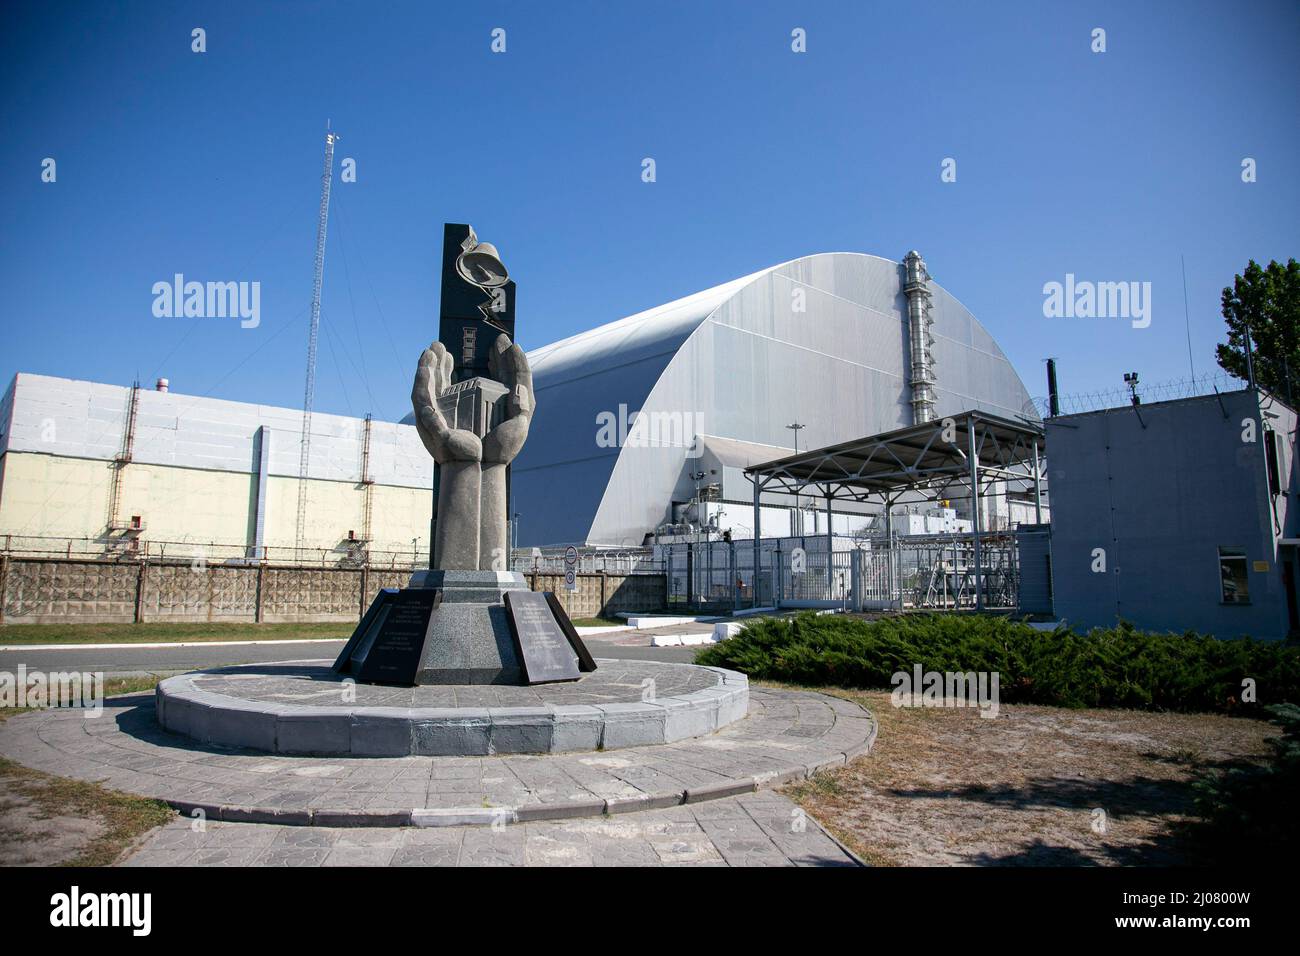 A sculpture of cupped hands holding a power plant was erected in 2006 outside of Chernobyl Nuclear Power Plant number 4 to the remembrance of the shift actions of plant workers and emergency crew who prevented what well could have been a catastrophe of global proportions. The situation of the Chernobyl nuclear plant remains at high risk according to the Ukrainian government since the Russian Force captured the area. The Russian Force repeatedly halt the energy supply to the nuclear plant which was used to cool down the core of the destroyed number 4 nuclear plant. However, the International At Stock Photo